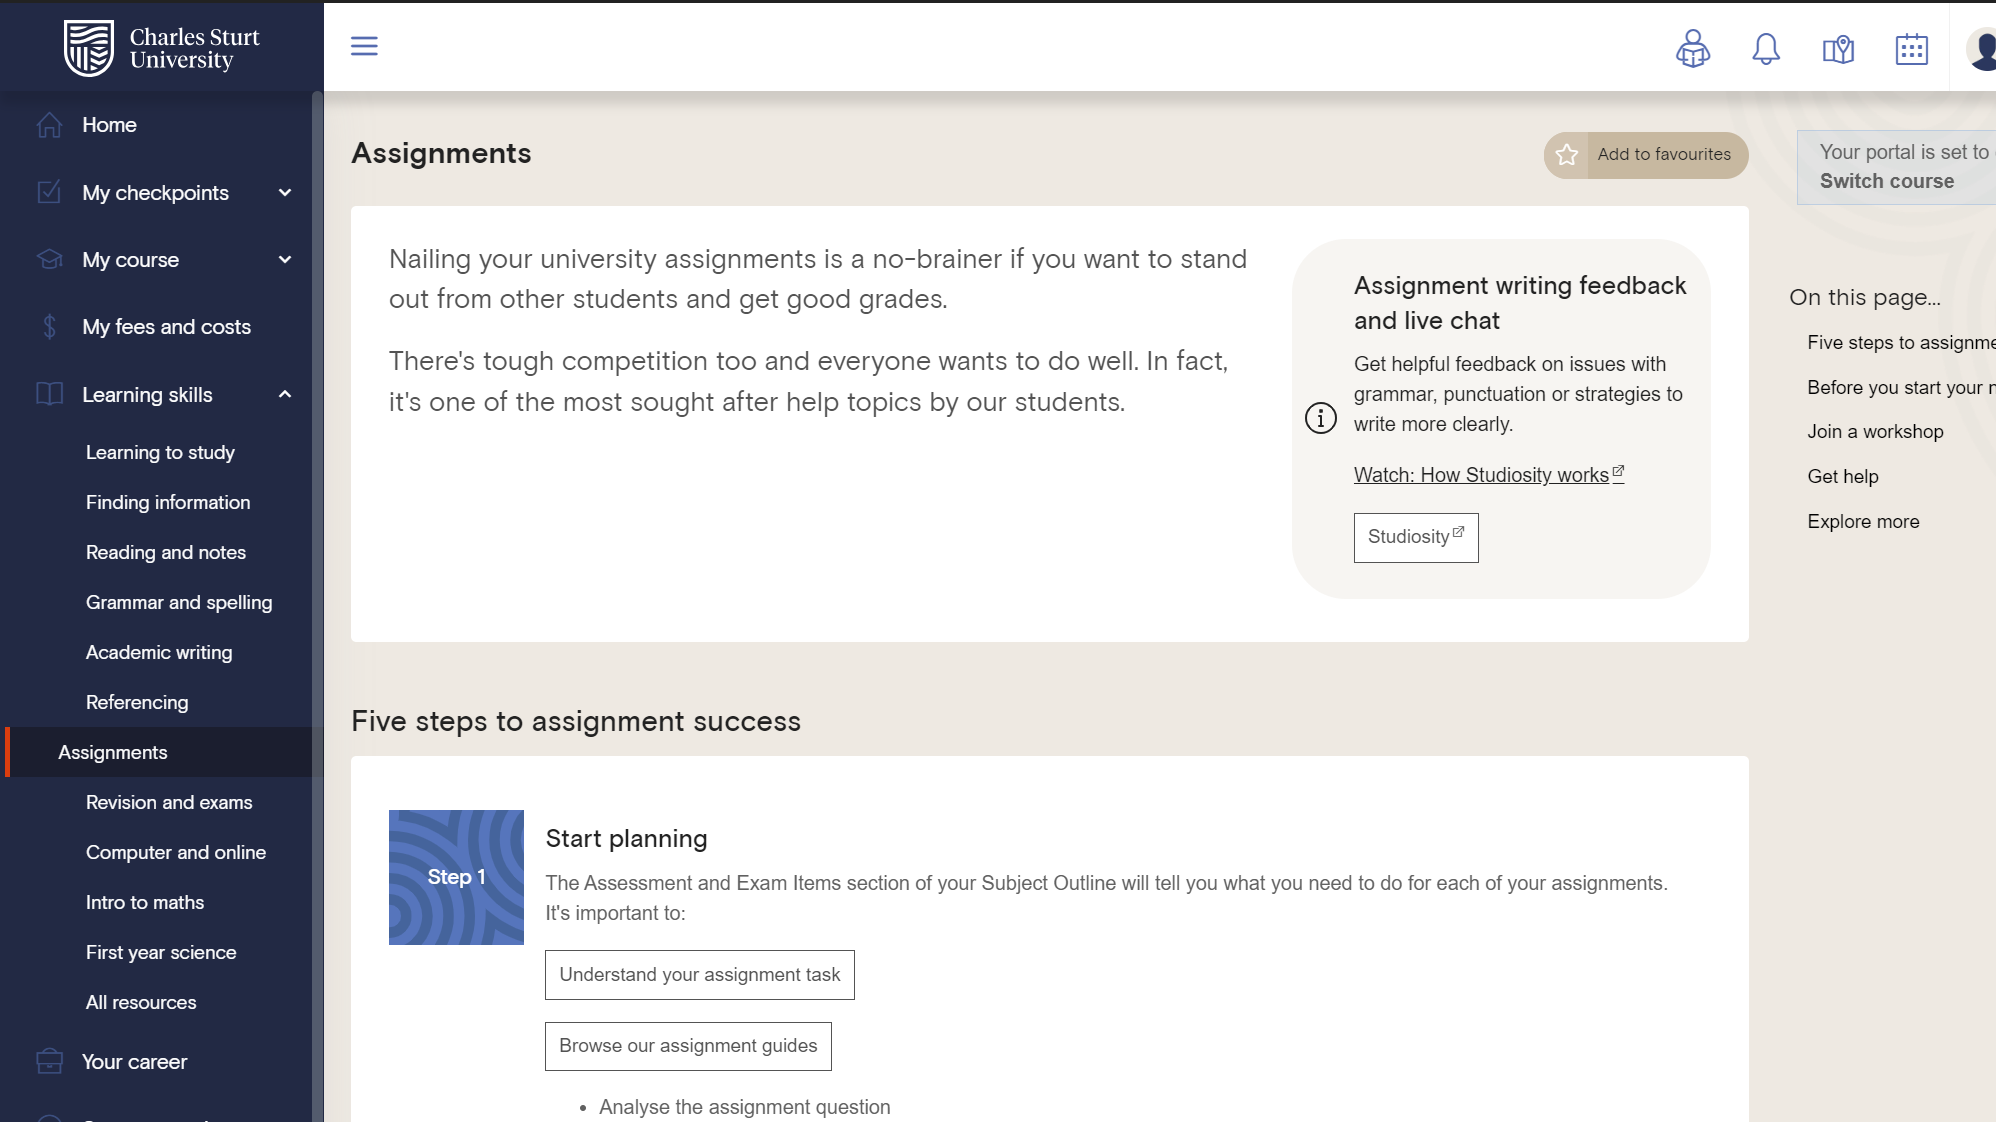 Screenshot of the '5 steps to assignment success' resource.